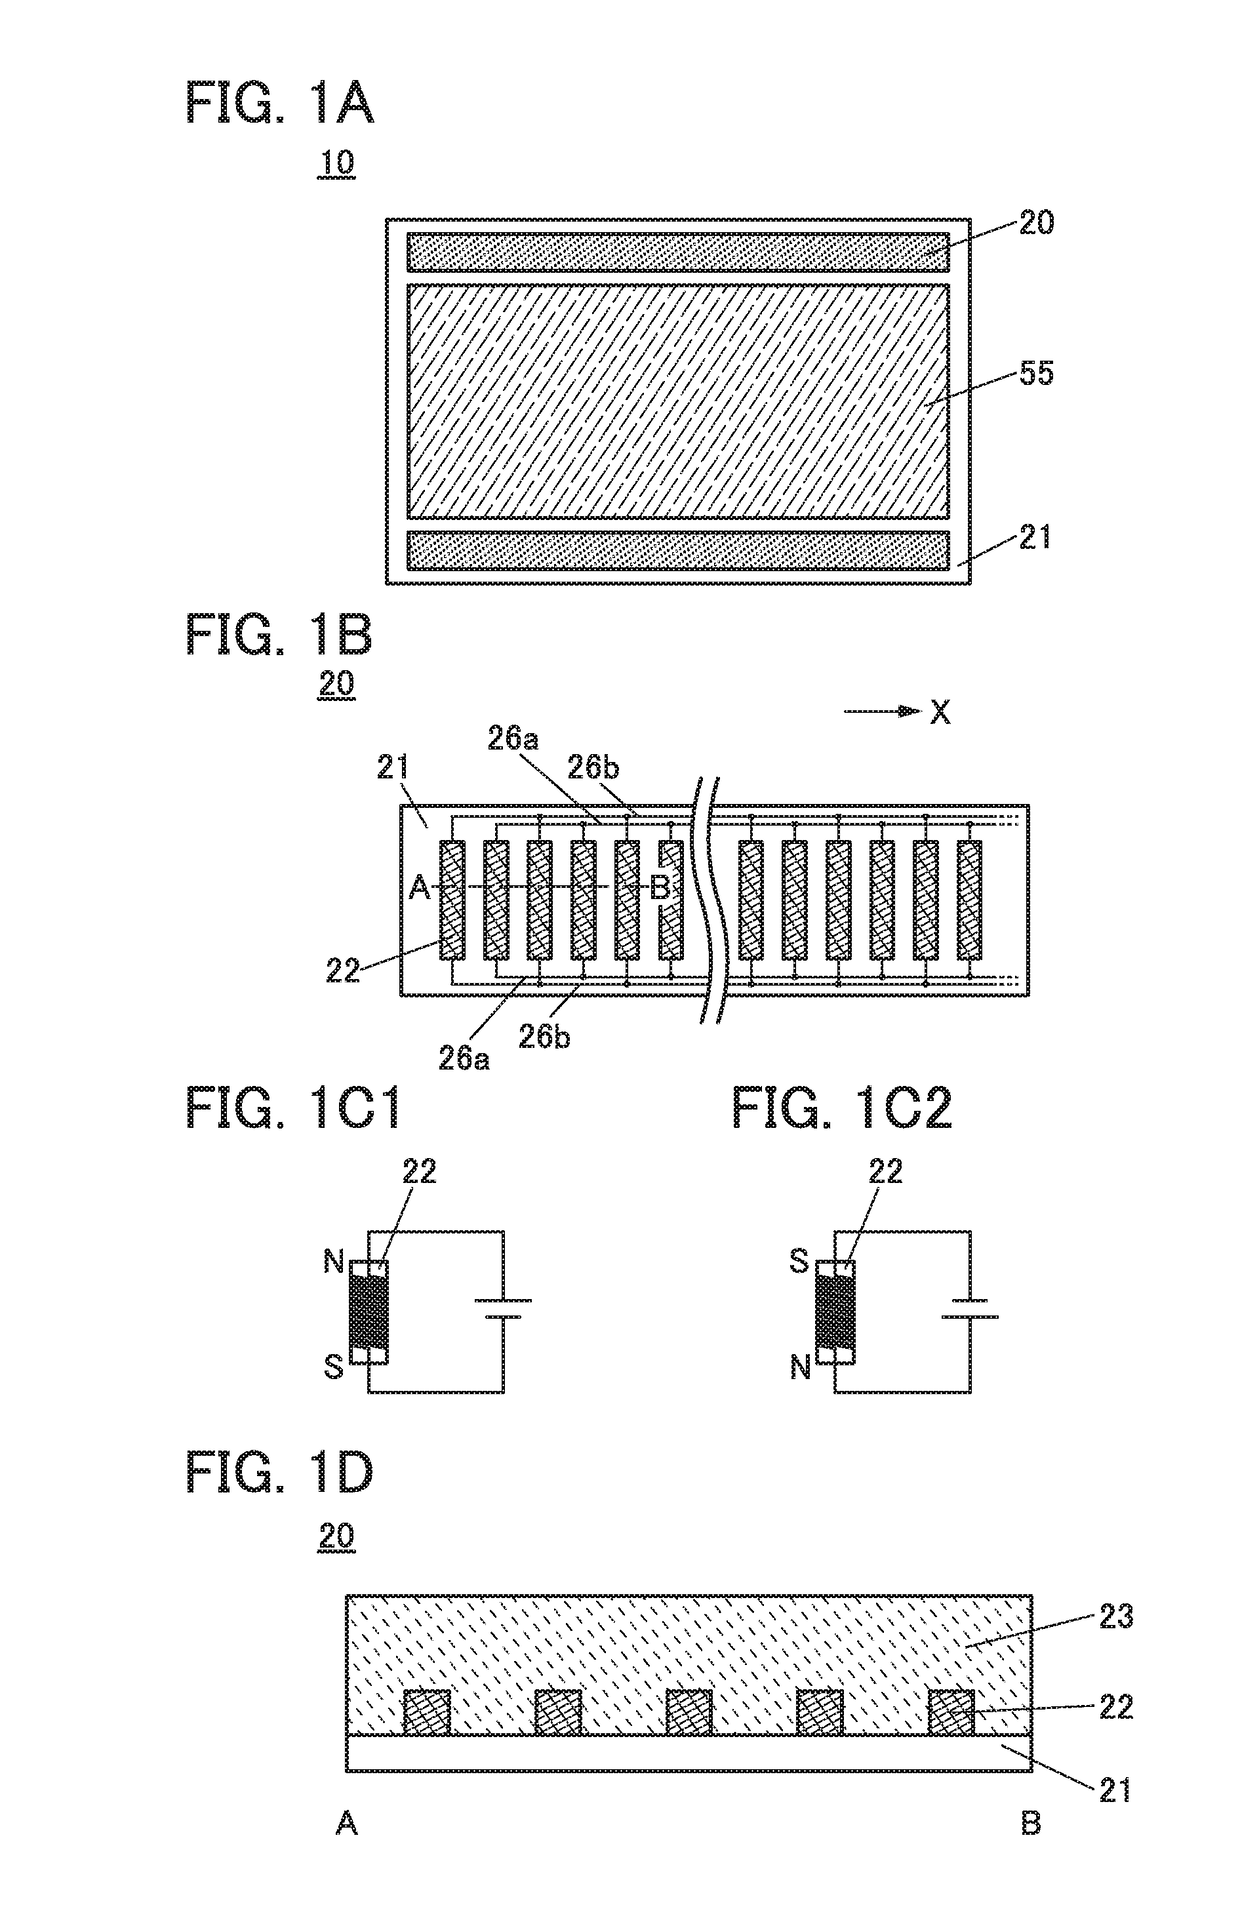 Circuit board and display system